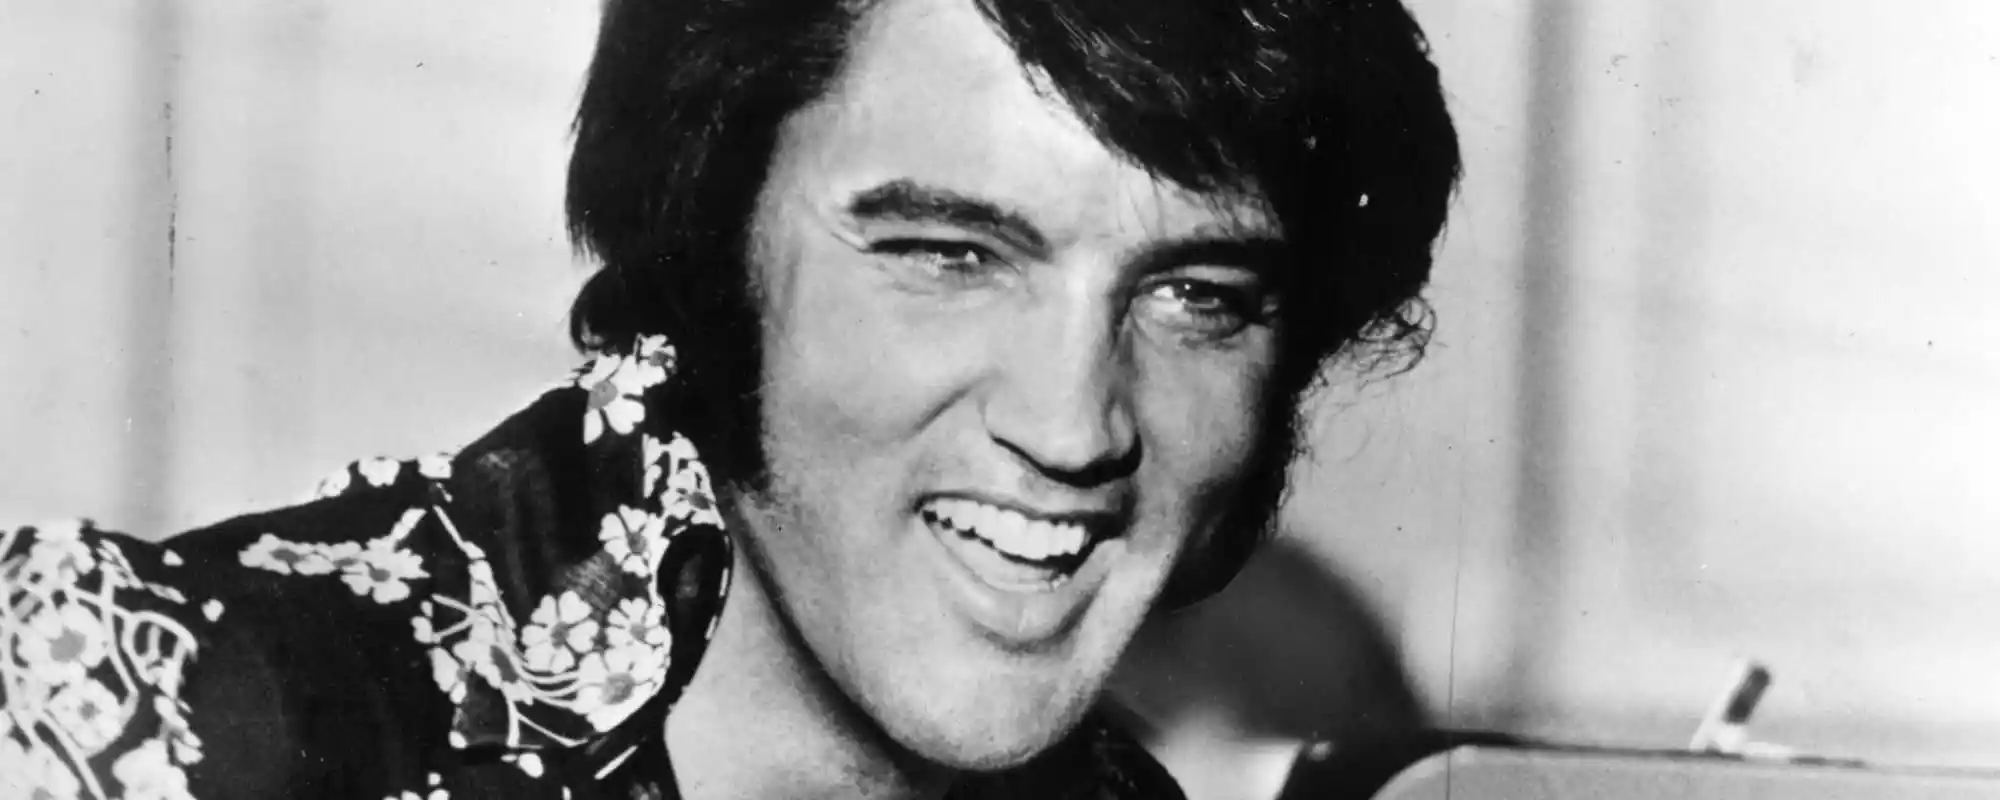 Behind The Song: “Suspicious Minds” by Elvis Presley